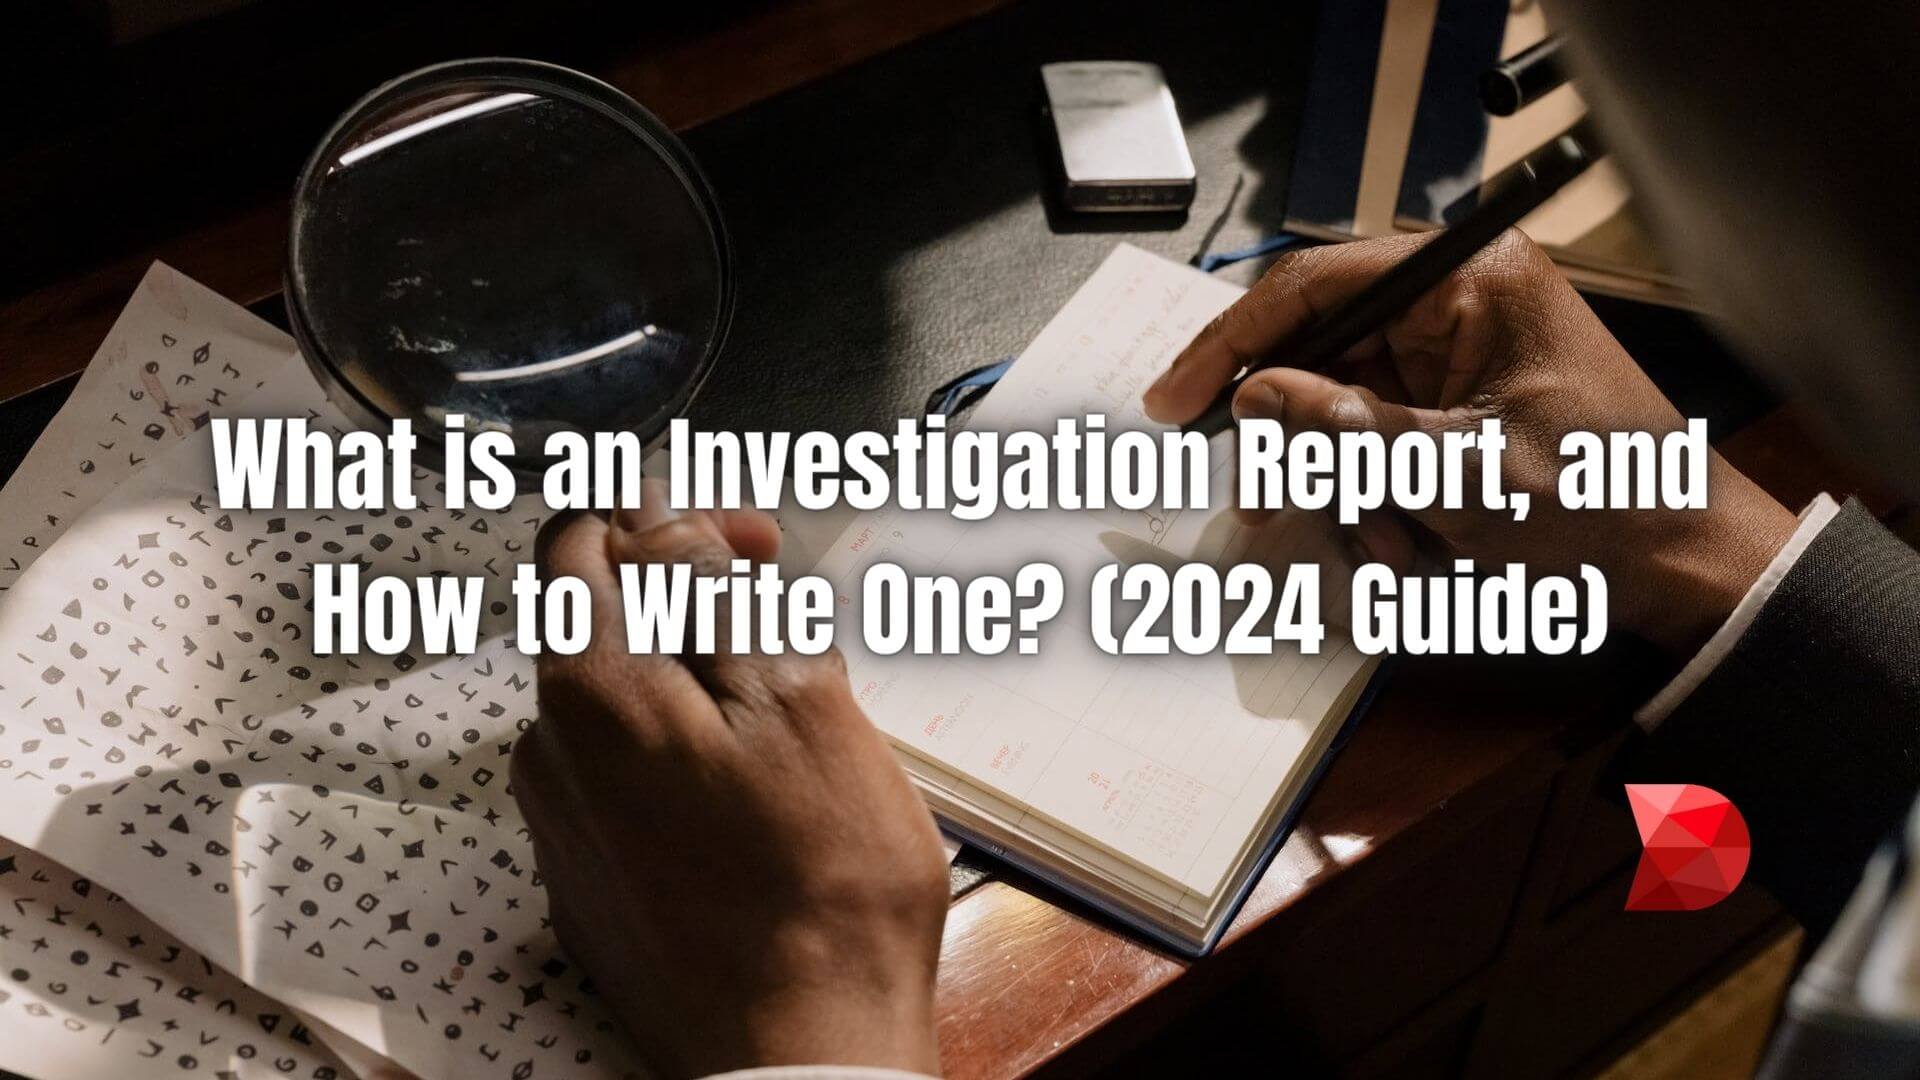 Learn to create effective investigation reports in 2024! Here's a comprehensive guide to understanding and writing reports efficiently.